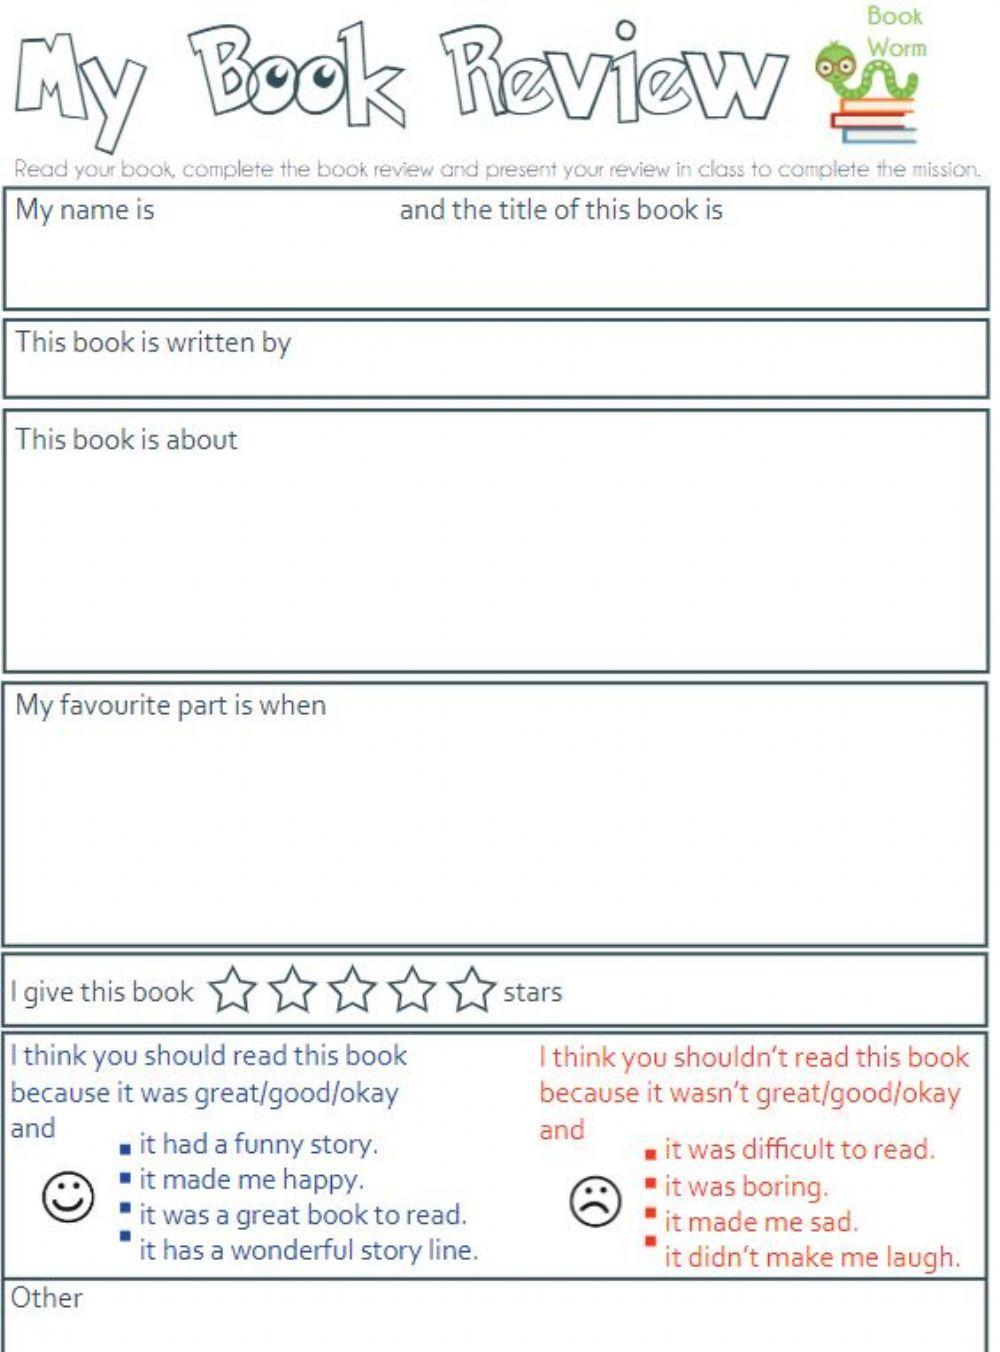 Book review form